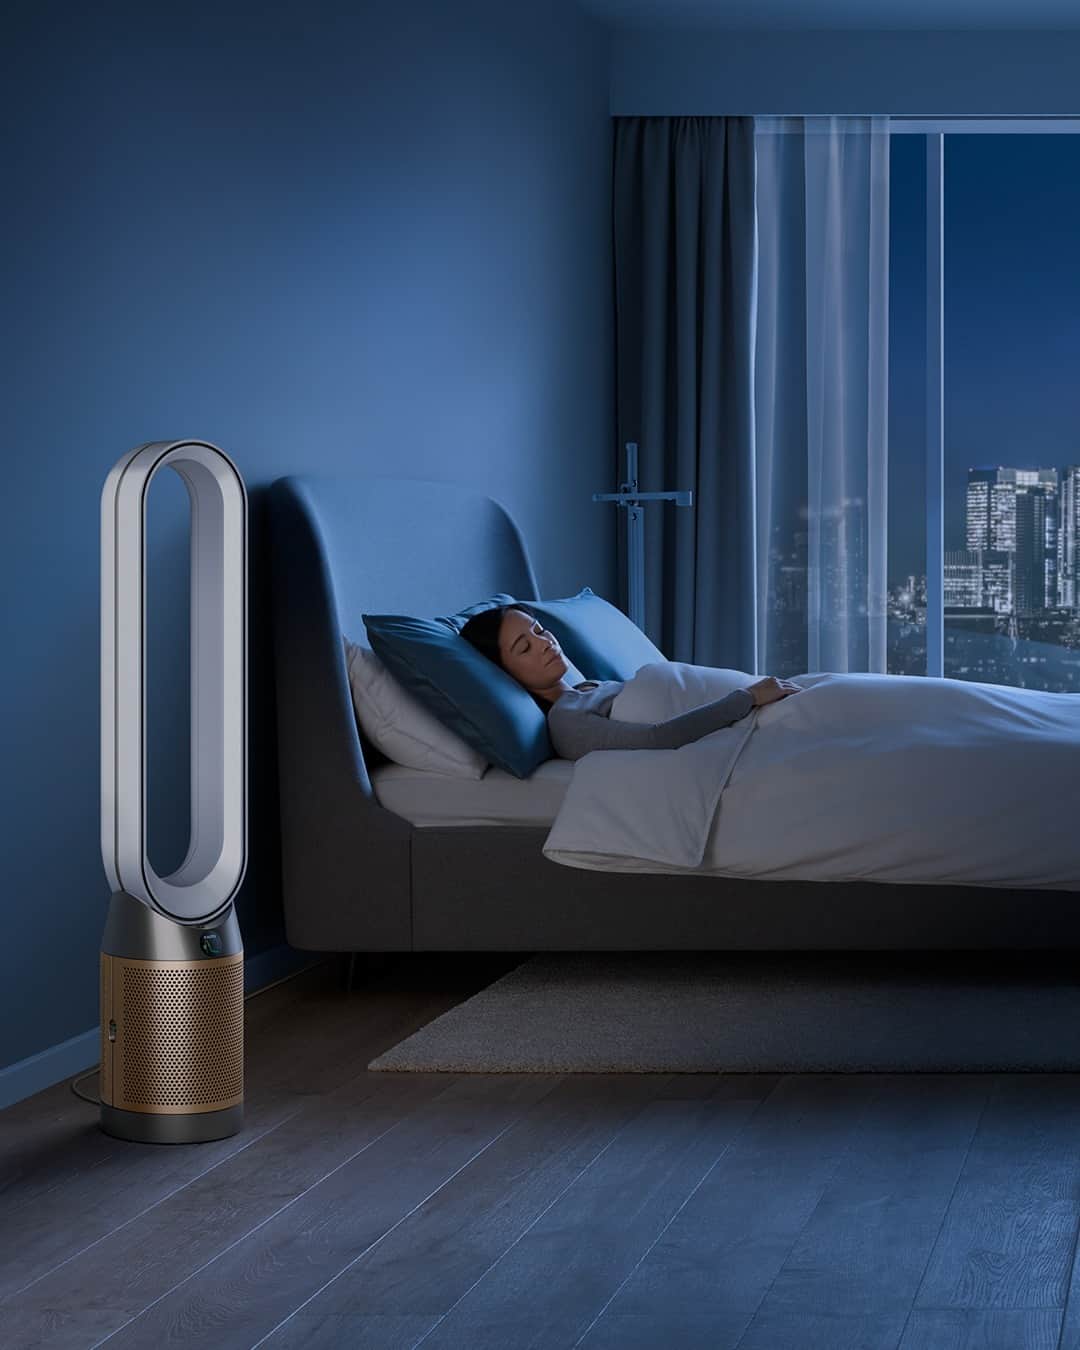 Dysonのインスタグラム：「Struggling to sleep in the summer heat? 💤  As pollution levels and temperatures may rise this season, it's important to take control of your indoor environment. Dyson air purifiers are engineered with Night mode that monitors and purifies, using the quietest settings and dimmed display. To help you enjoy a peaceful slumber.  Discover more using the link in bio.  #DysonPurifier #Heatwave #SummerNights #DysonTechnology」